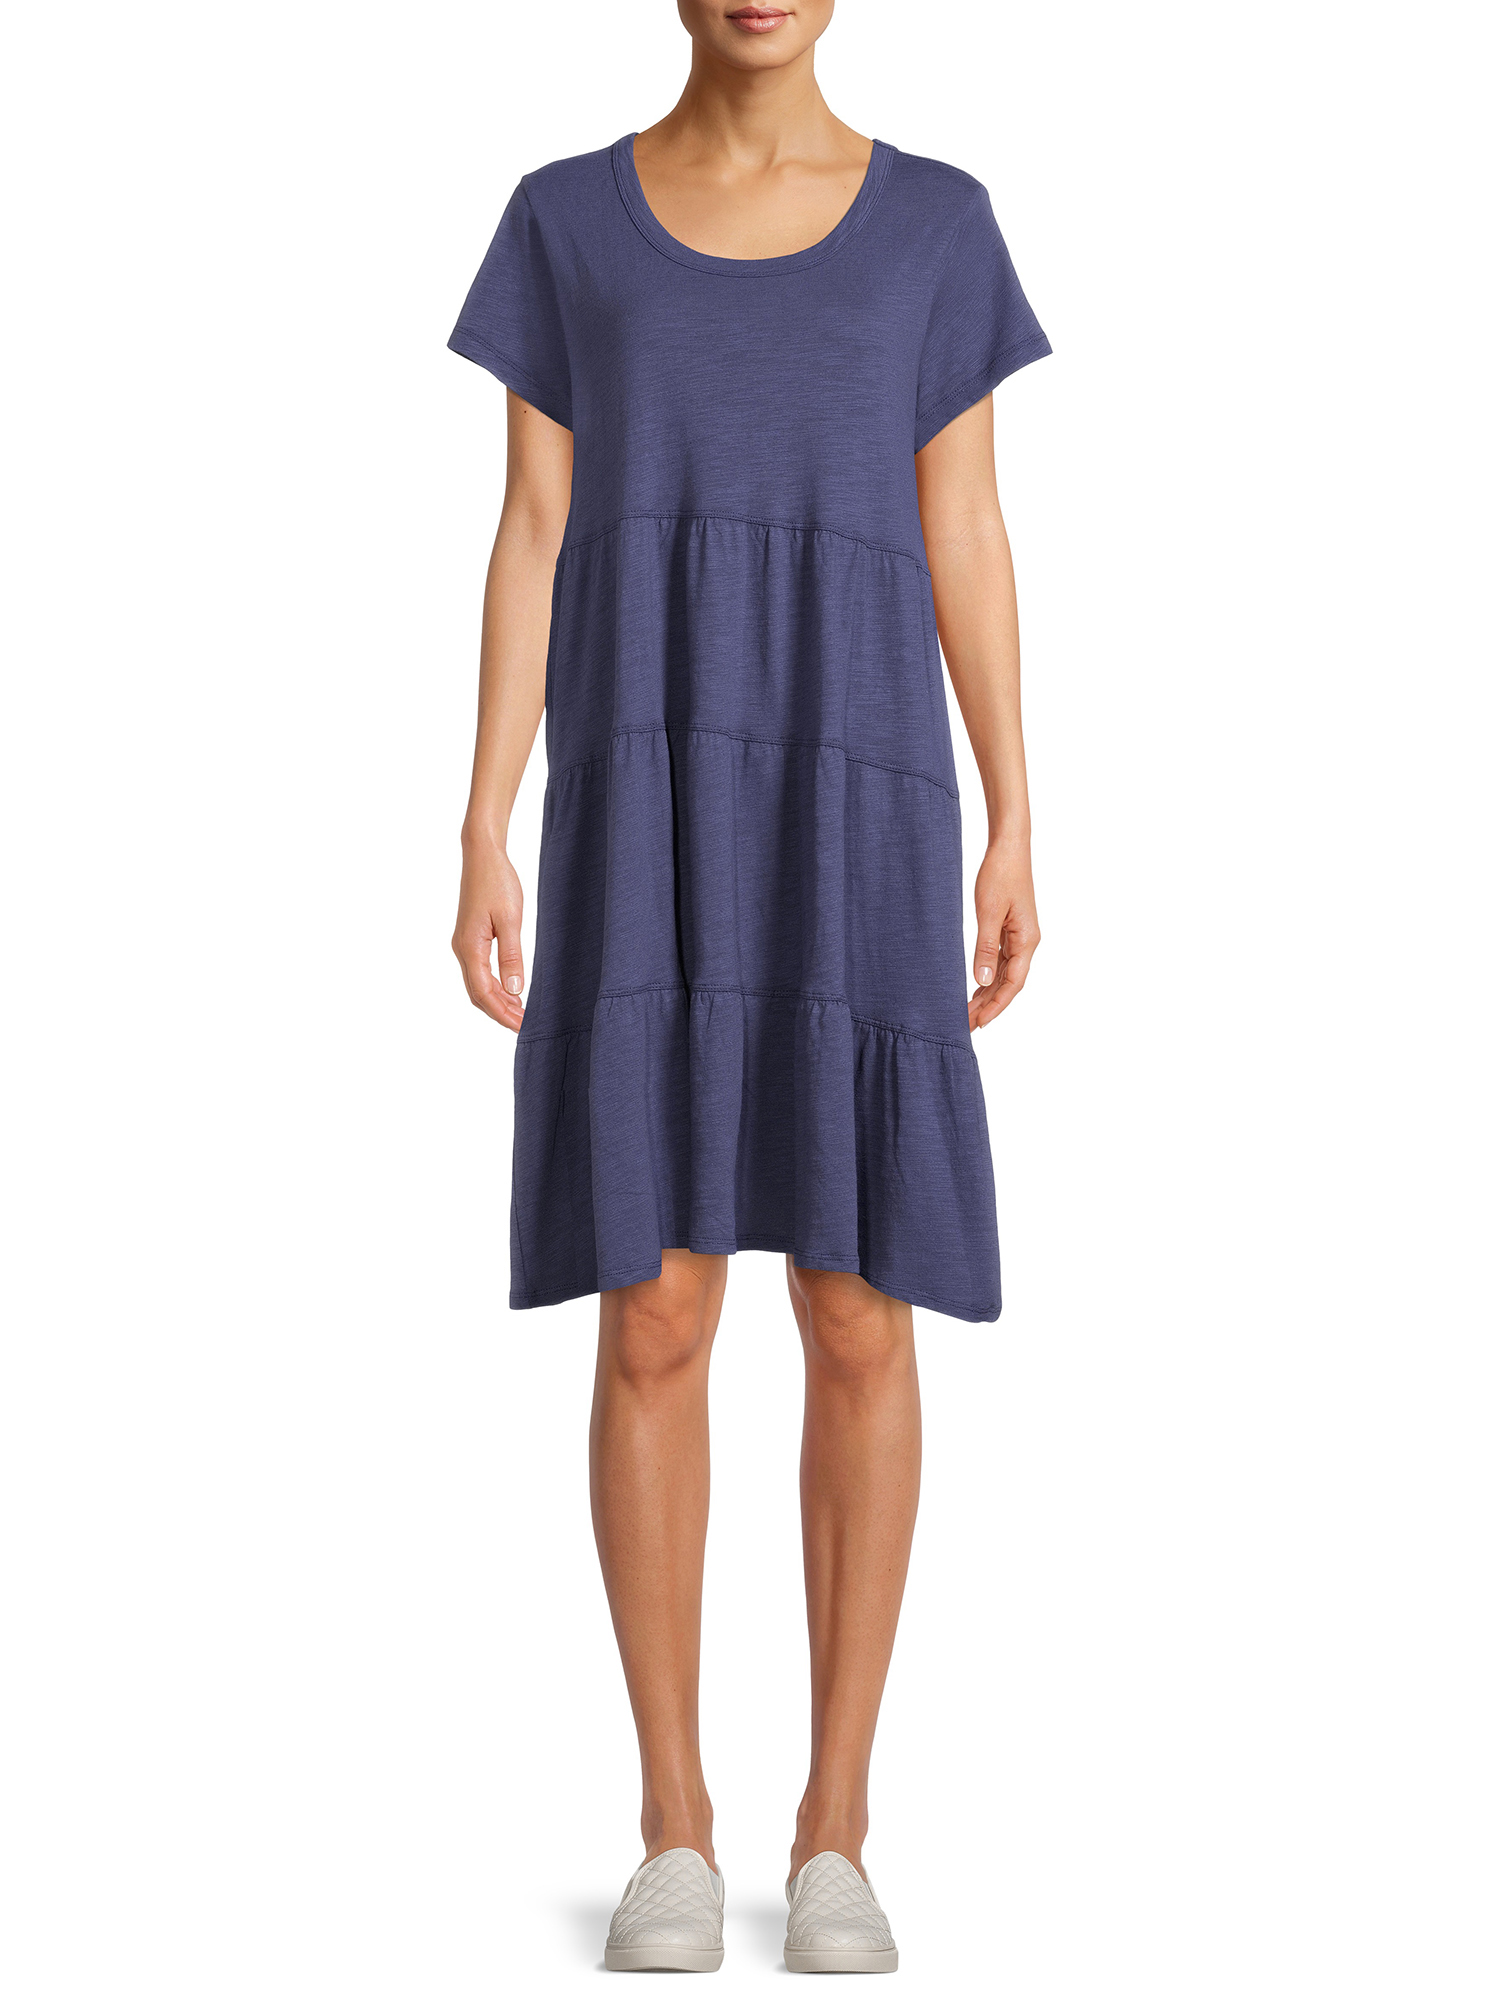 Time and Tru Women's Tiered Knit Dress - image 1 of 7